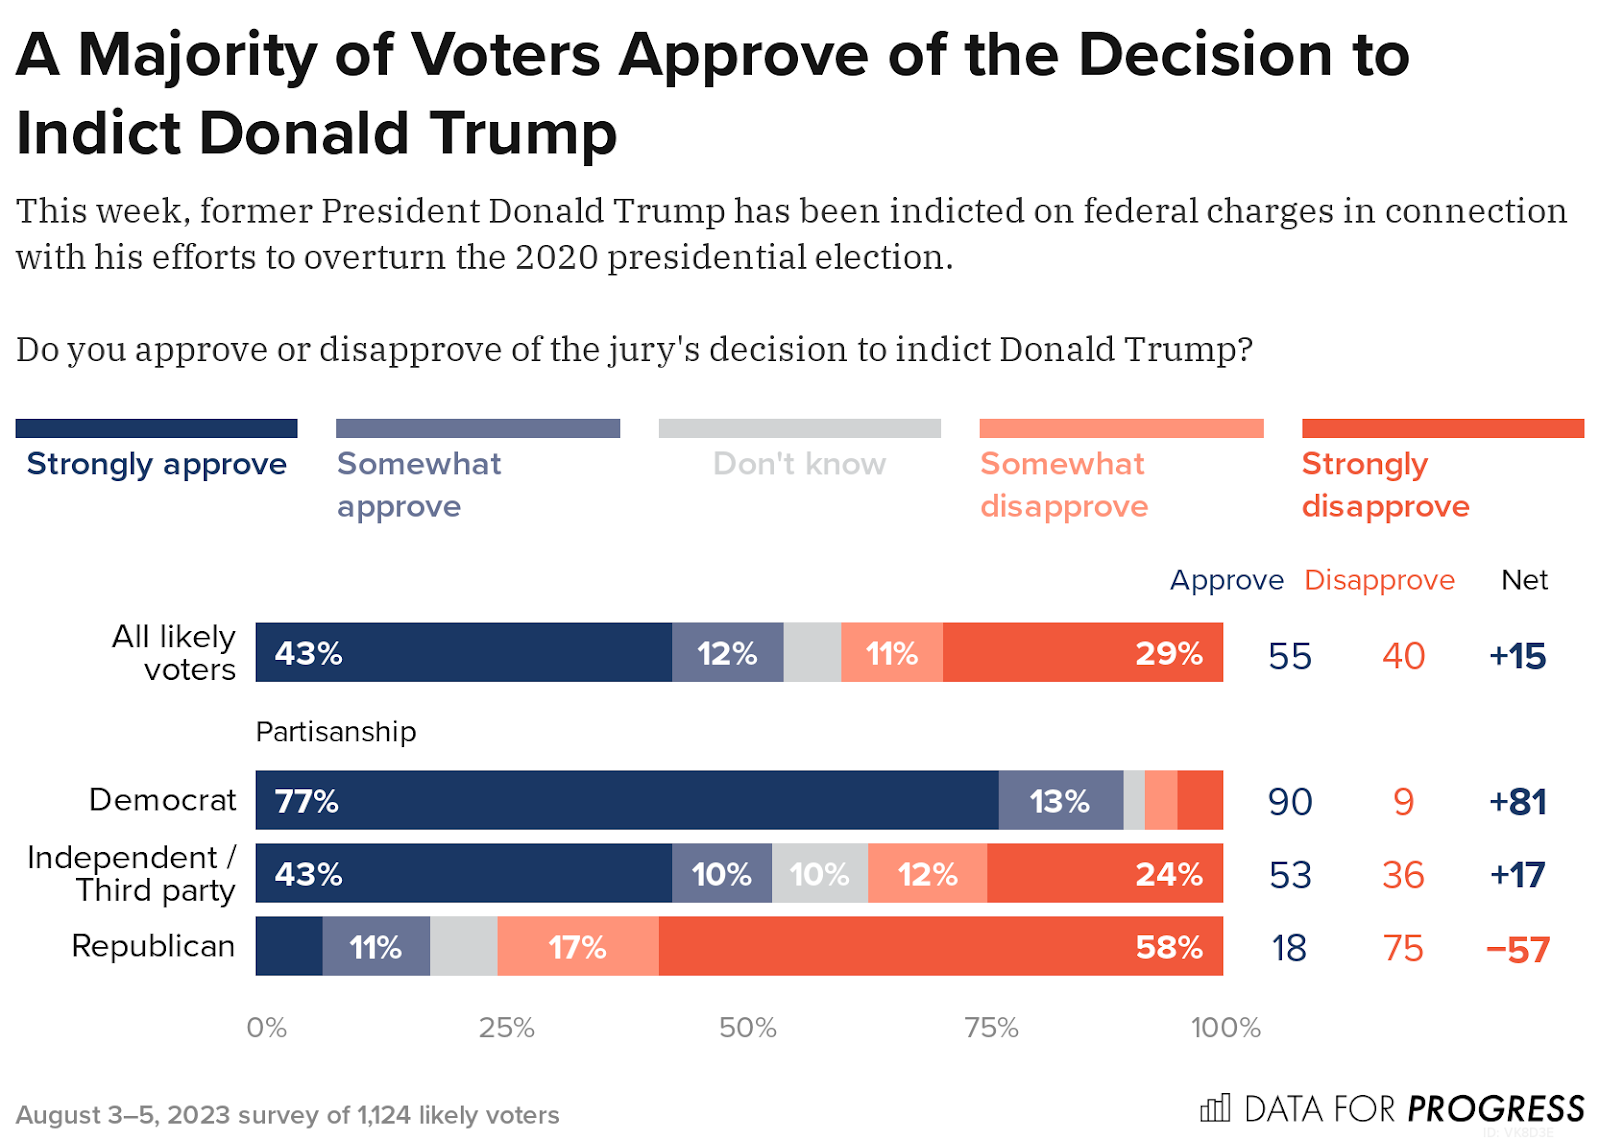 A majority of voters approve of the decision to indict Donald Trump